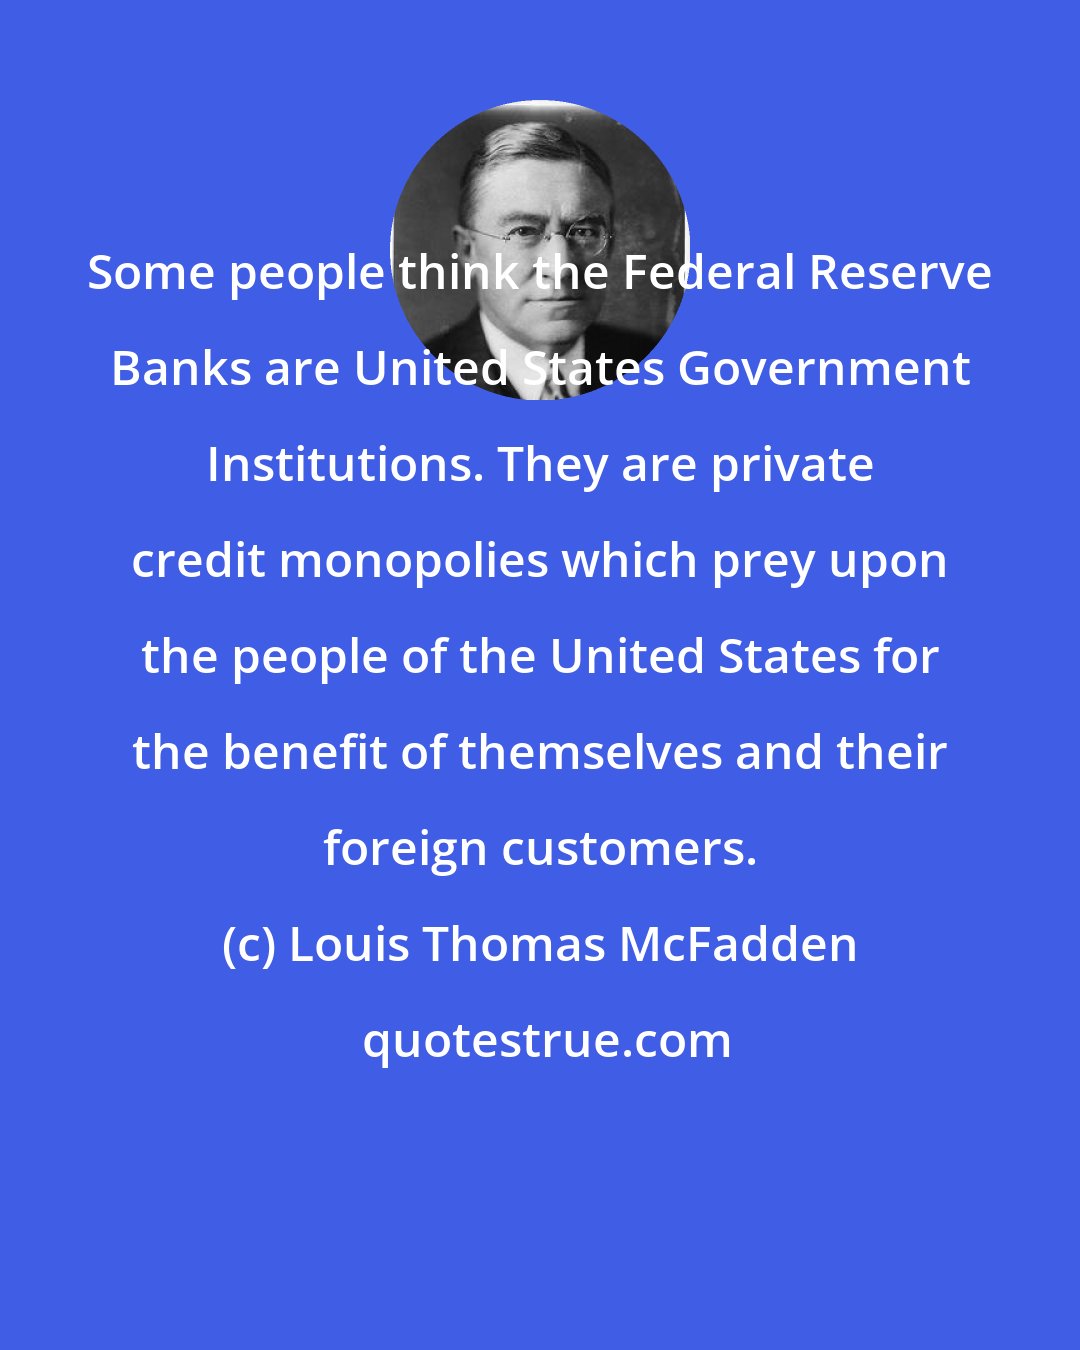 Louis Thomas McFadden: Some people think the Federal Reserve Banks are United States Government Institutions. They are private credit monopolies which prey upon the people of the United States for the benefit of themselves and their foreign customers.